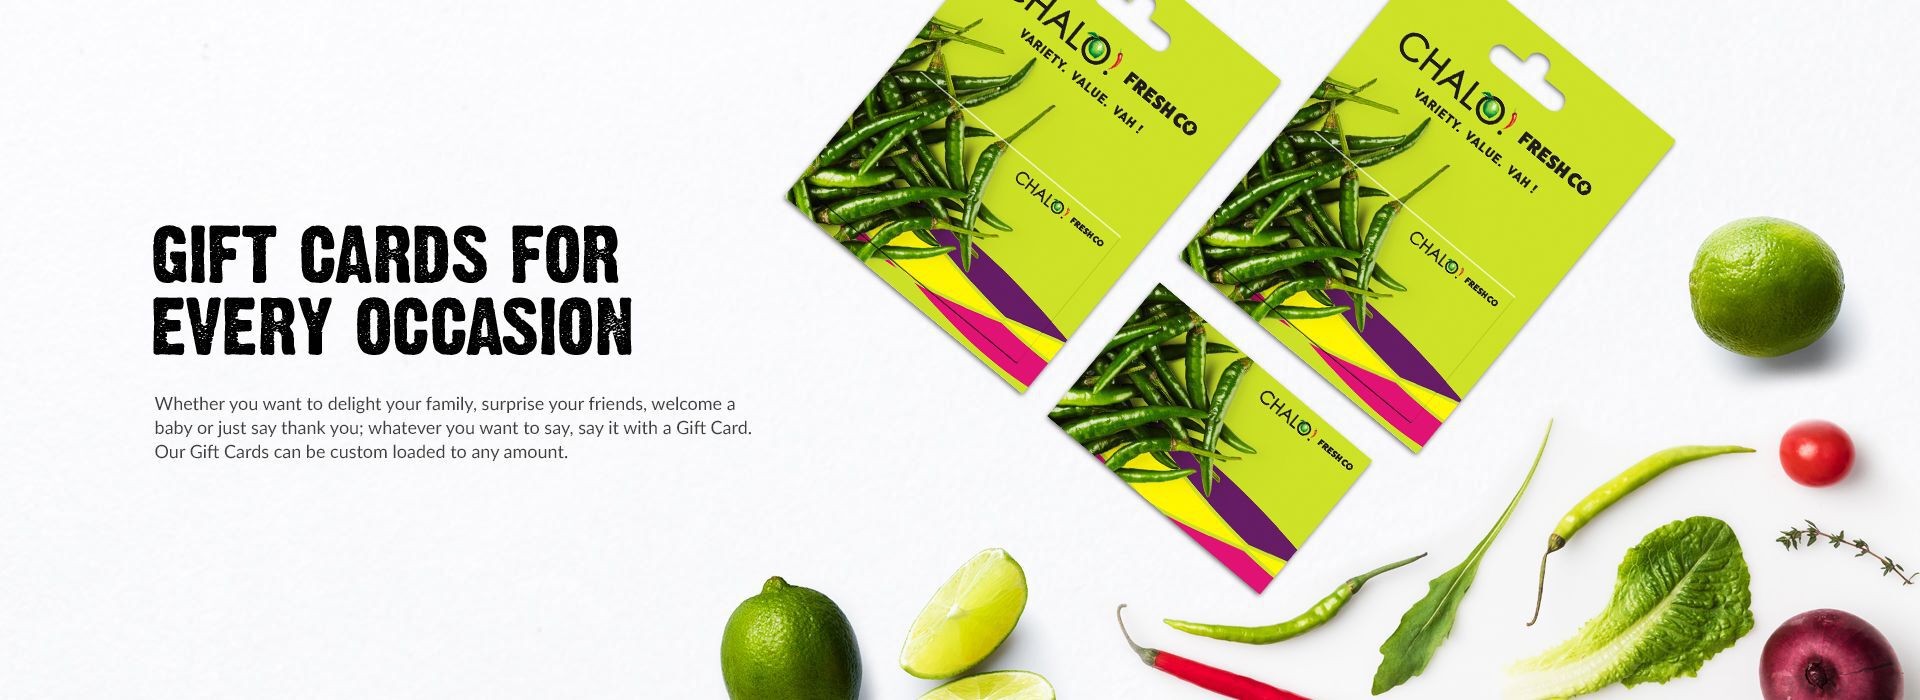 Gift card for occasions